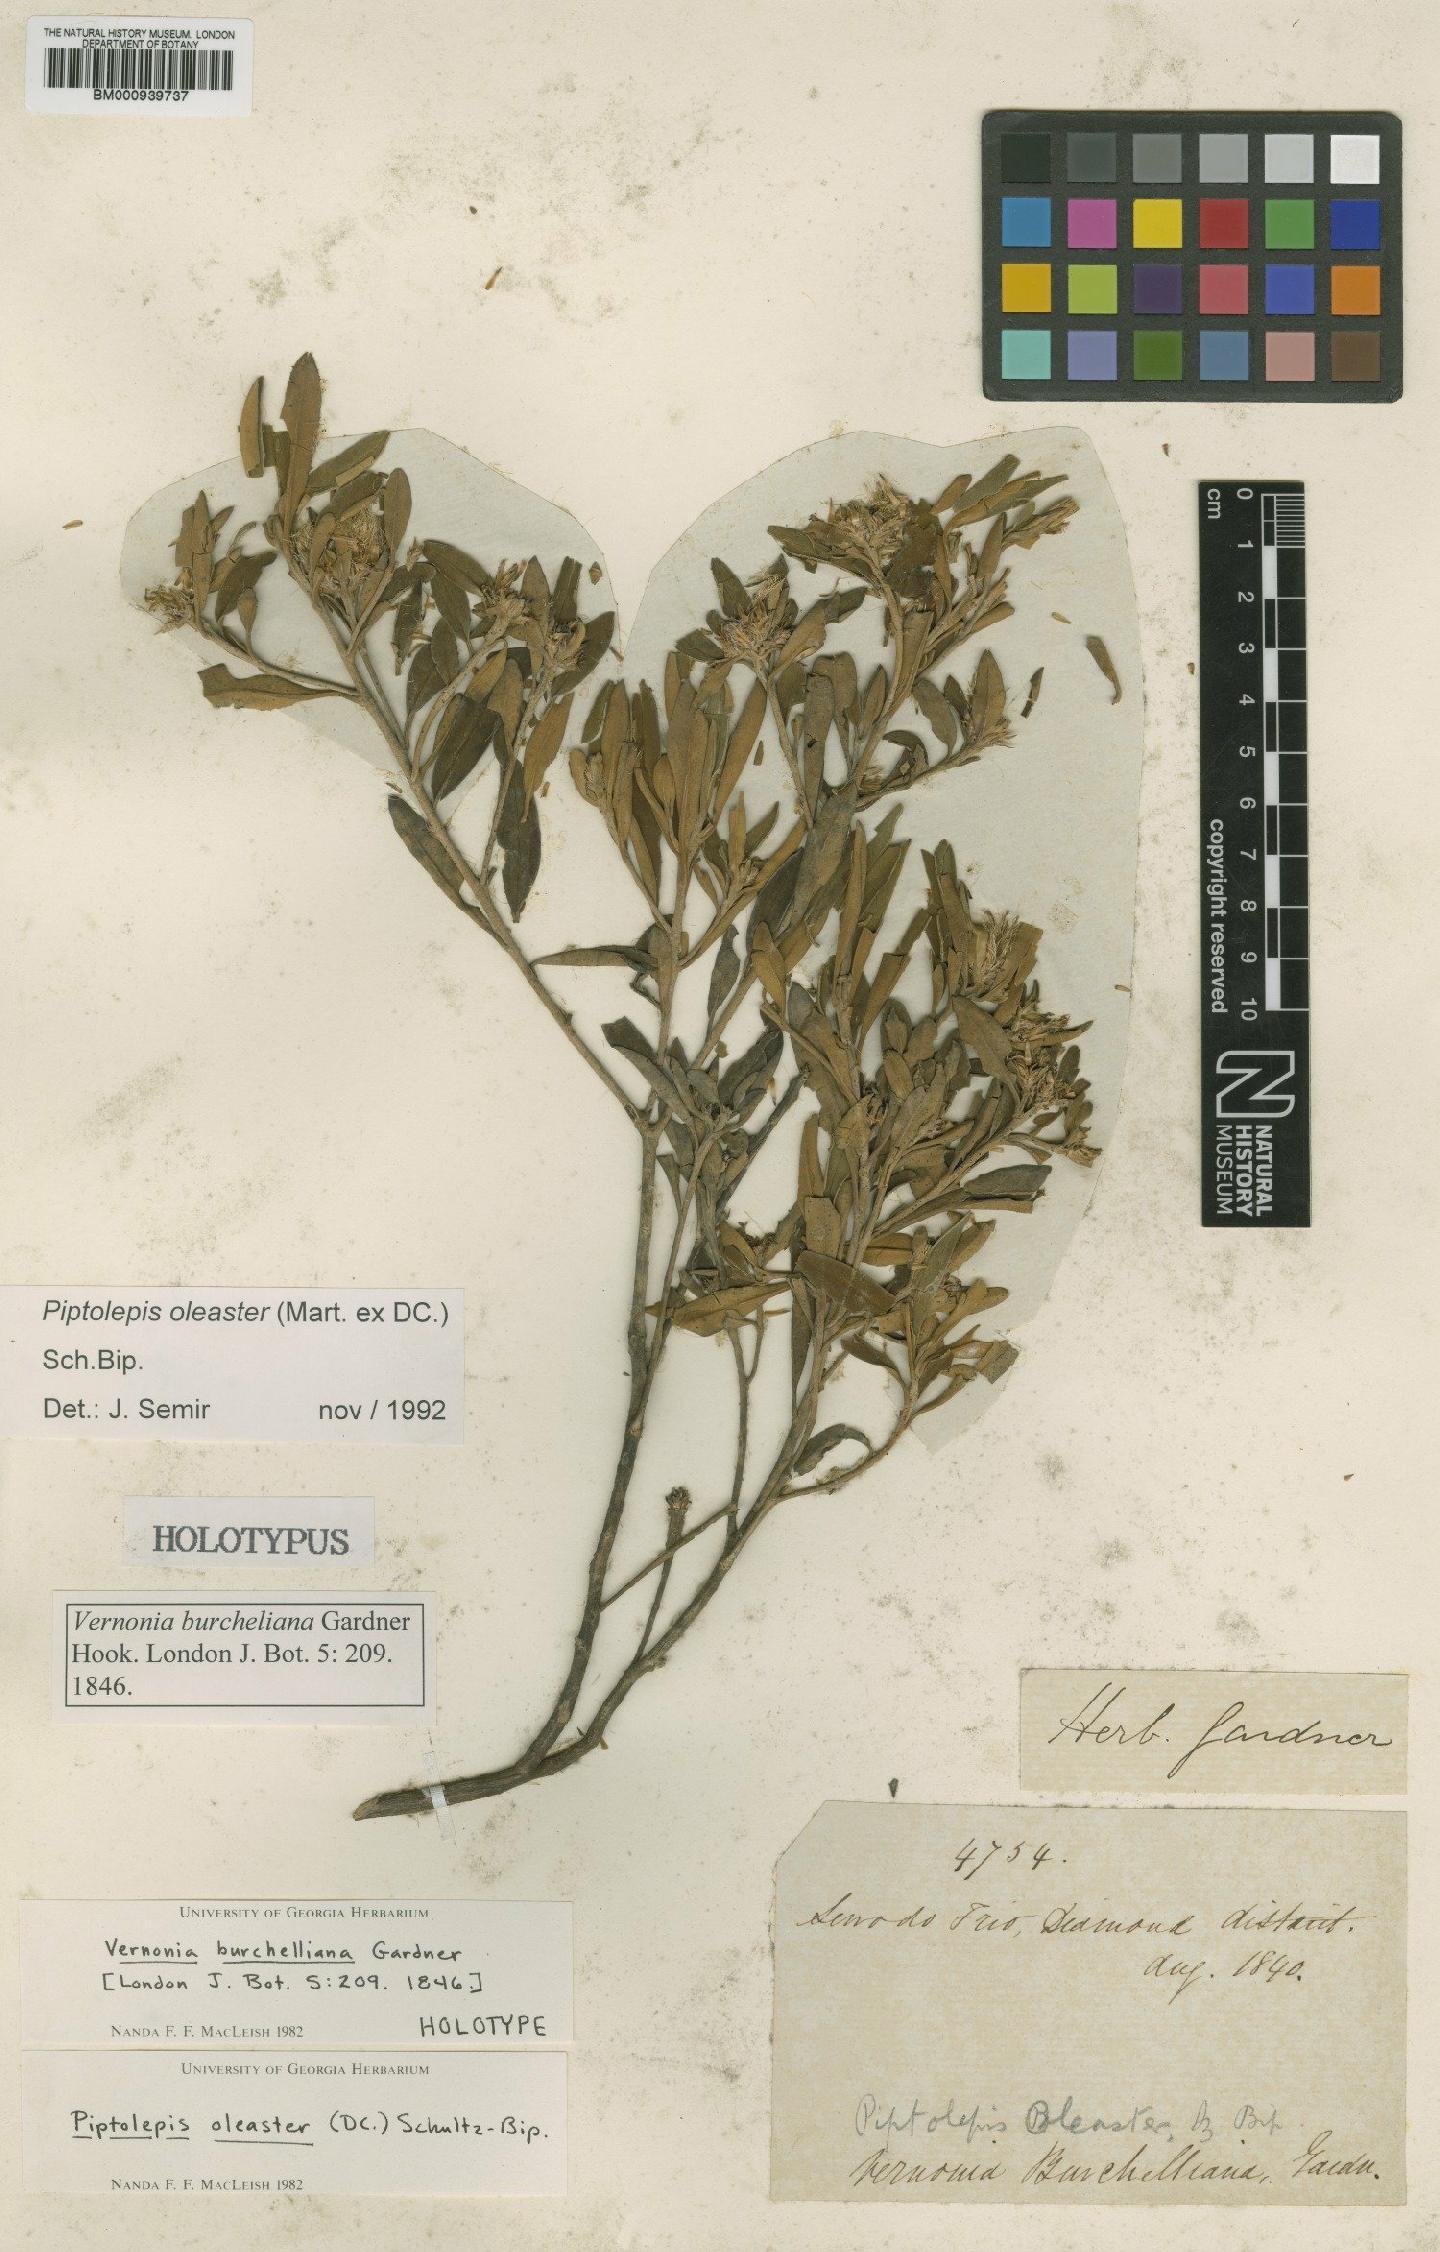 To NHMUK collection (Piptolepis oleaster (DC.) Sch.Bip.; Holotype; NHMUK:ecatalogue:2283843)